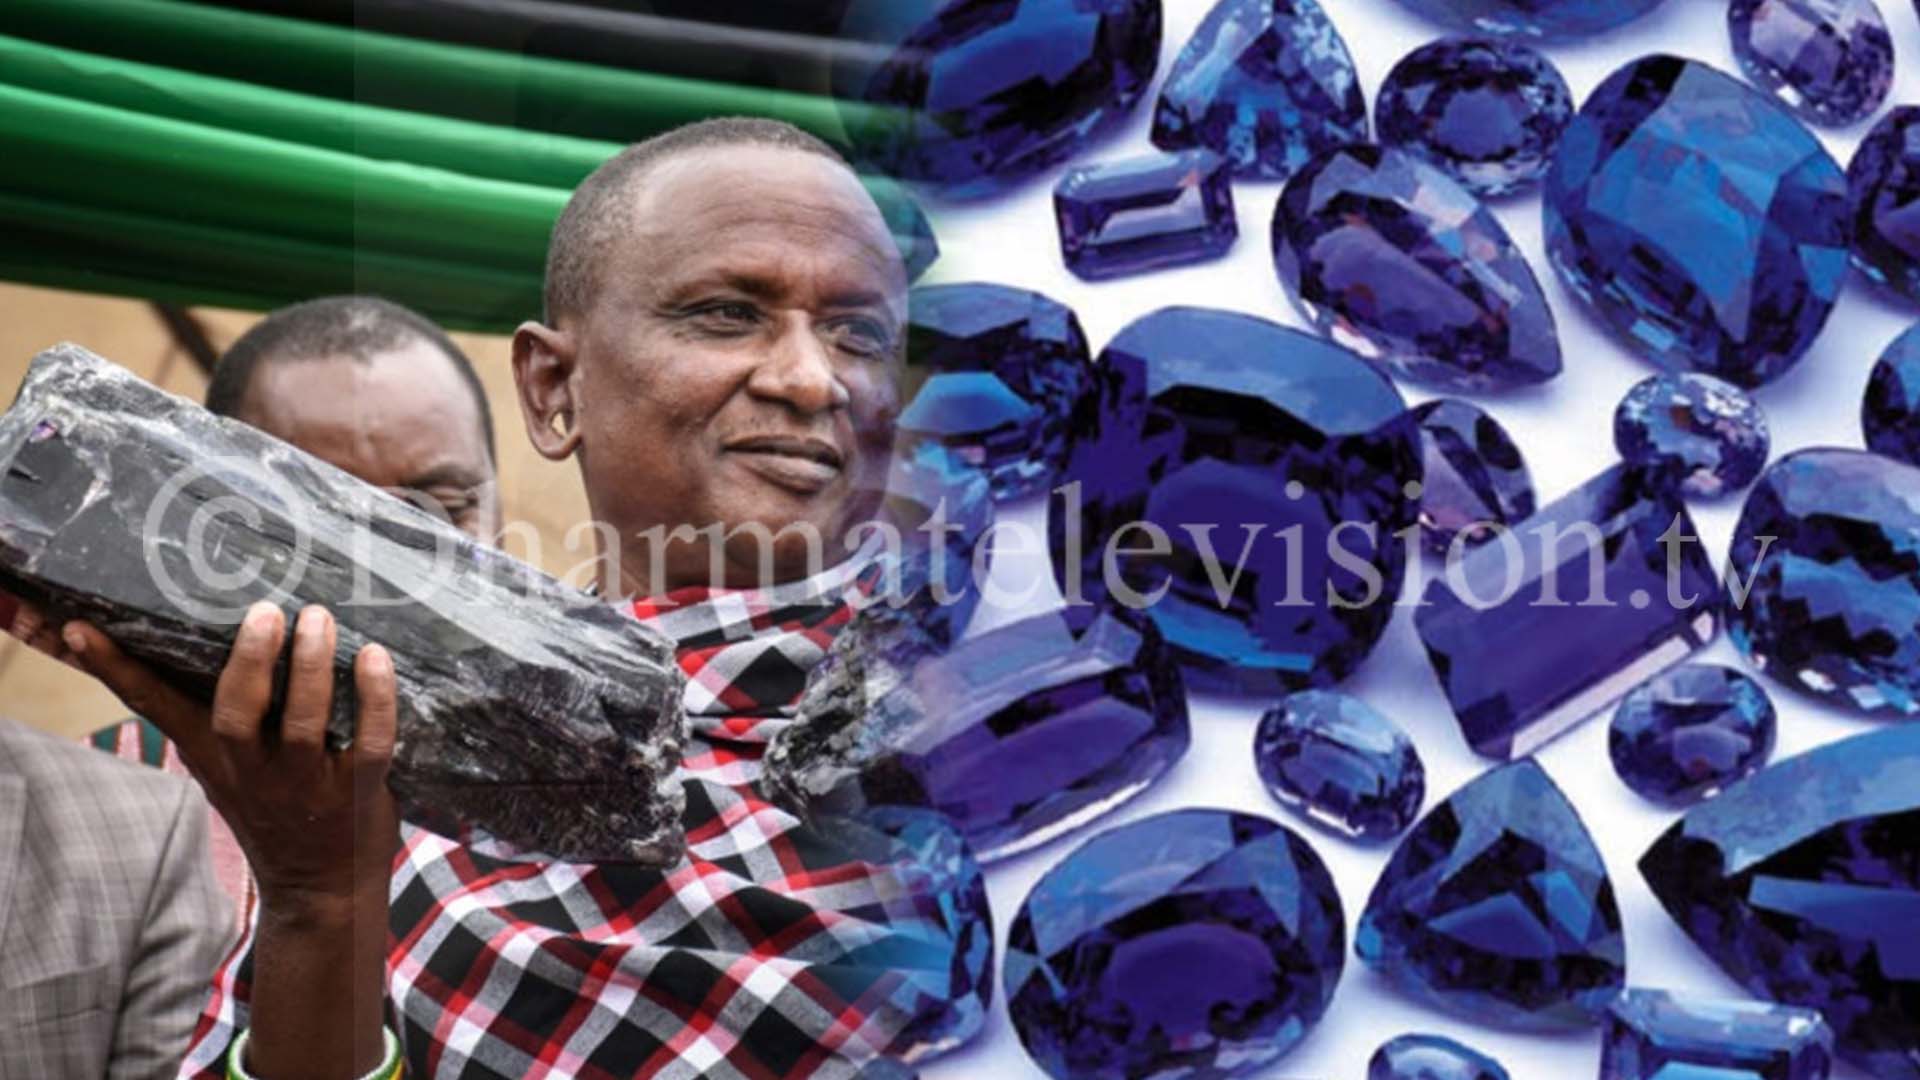 3 Tanzanite stones, considered 1000 times rarer than Diamond, Sold at $5.5 million by a miner in Tanzania within about a month’s gap